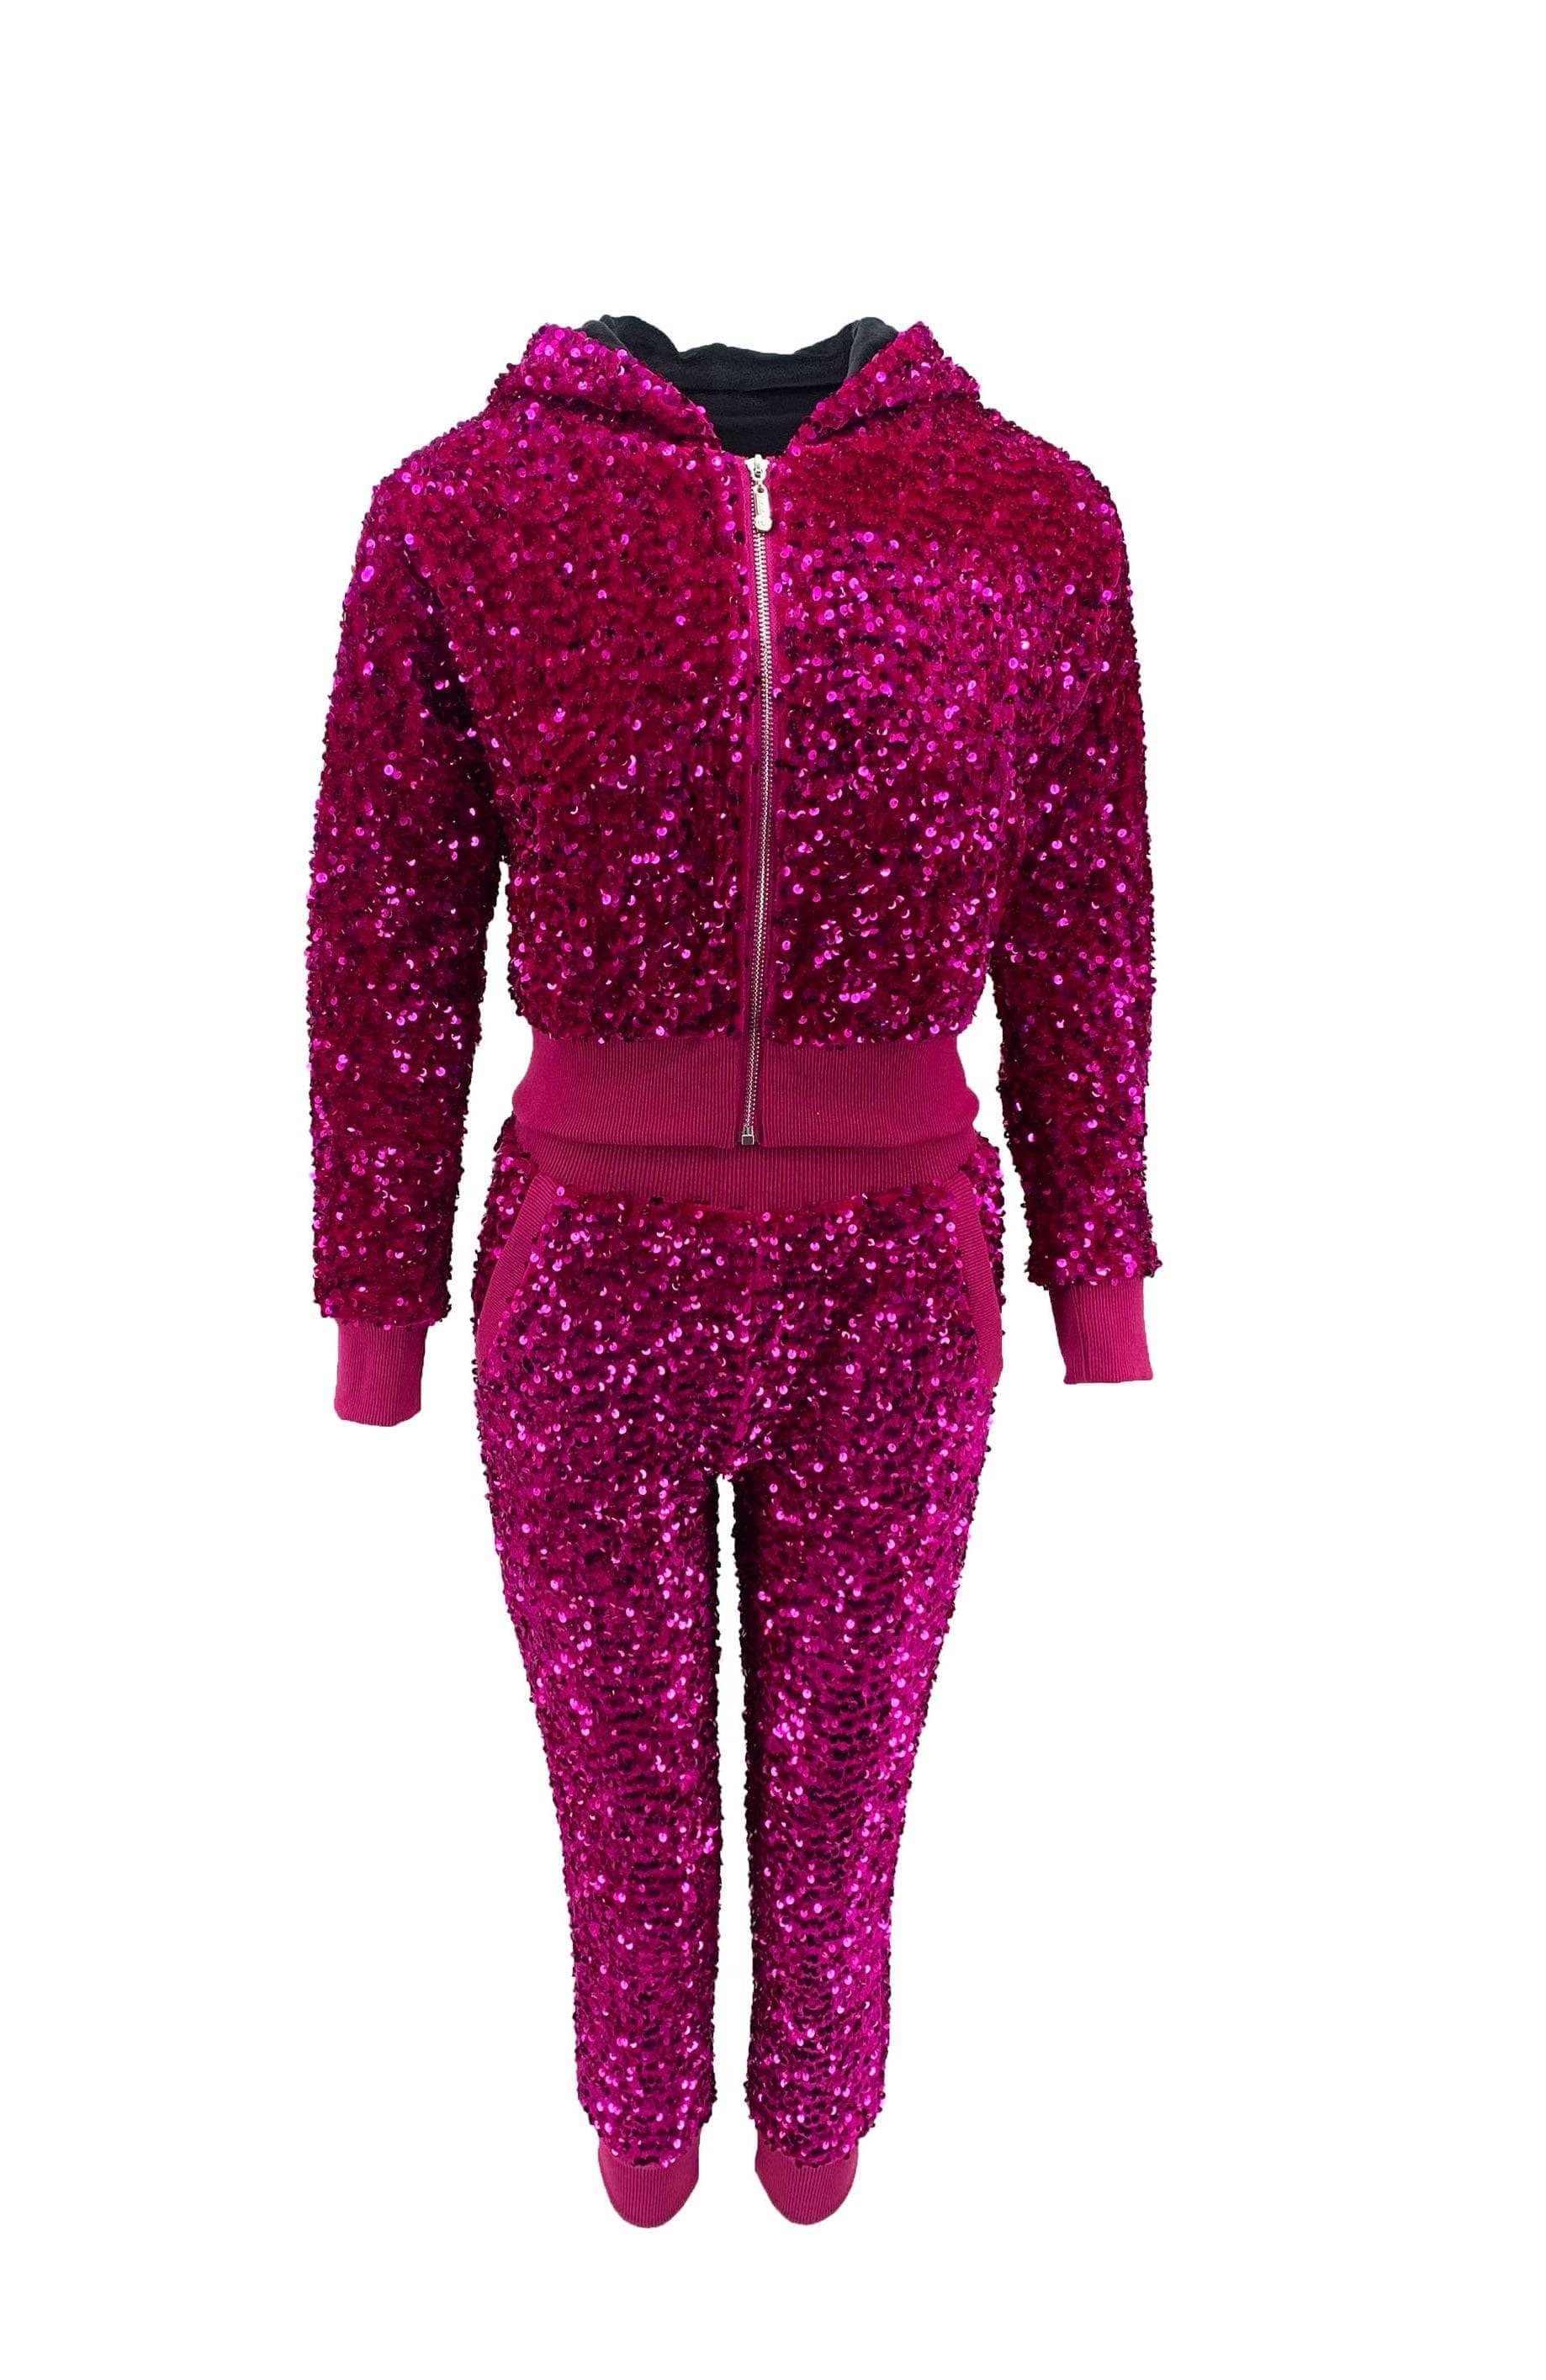 Mystical Moves Sequin Top and Skirt Set - Fuchsia Pink - H&O